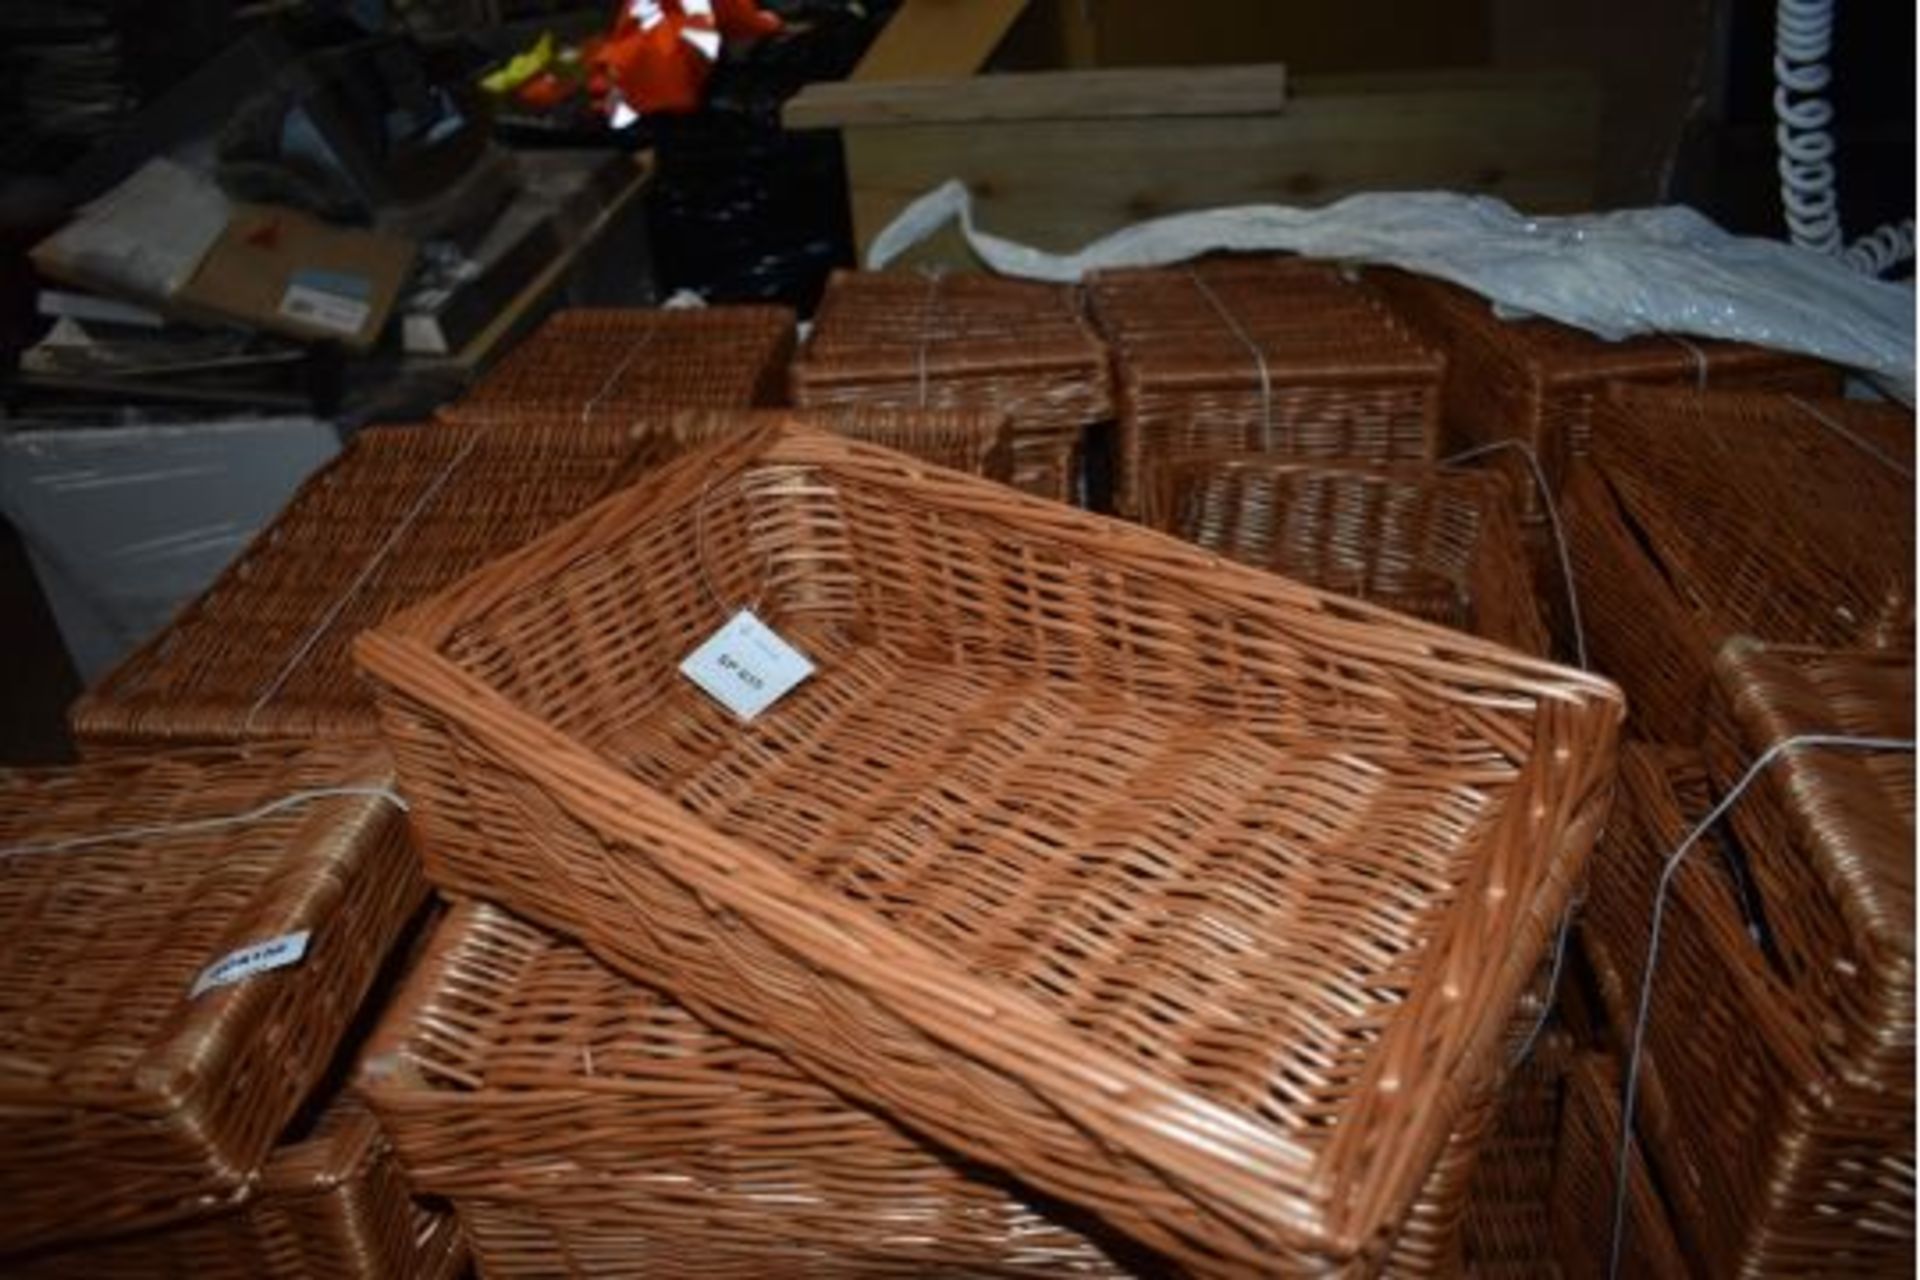 4 x Hand Woven Retail Display Sloping Wicker Baskets - Ideal For Presentation in Wide Range of - Image 4 of 7